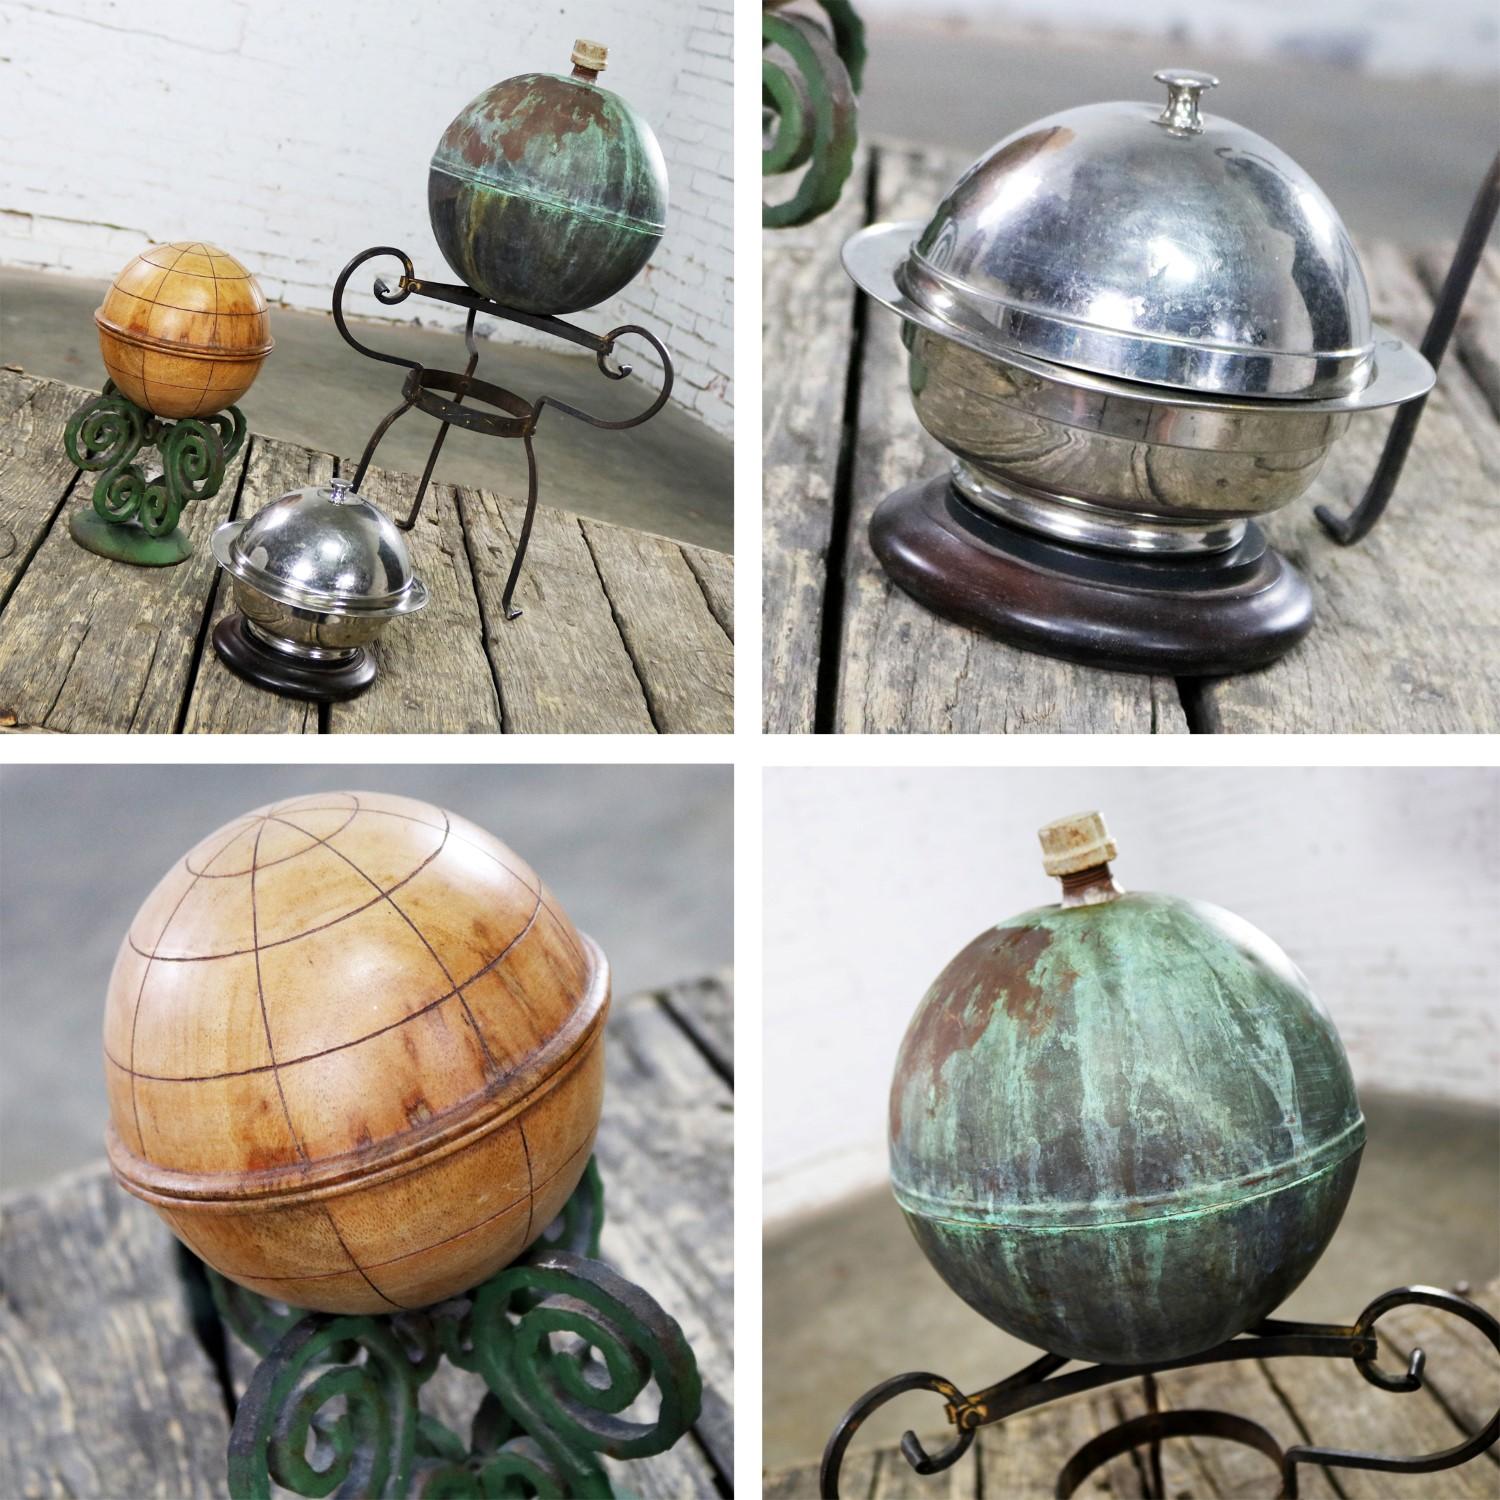 Collection of Orb Objects on Stands als Centerpiece oder Object d'Art im Angebot 6